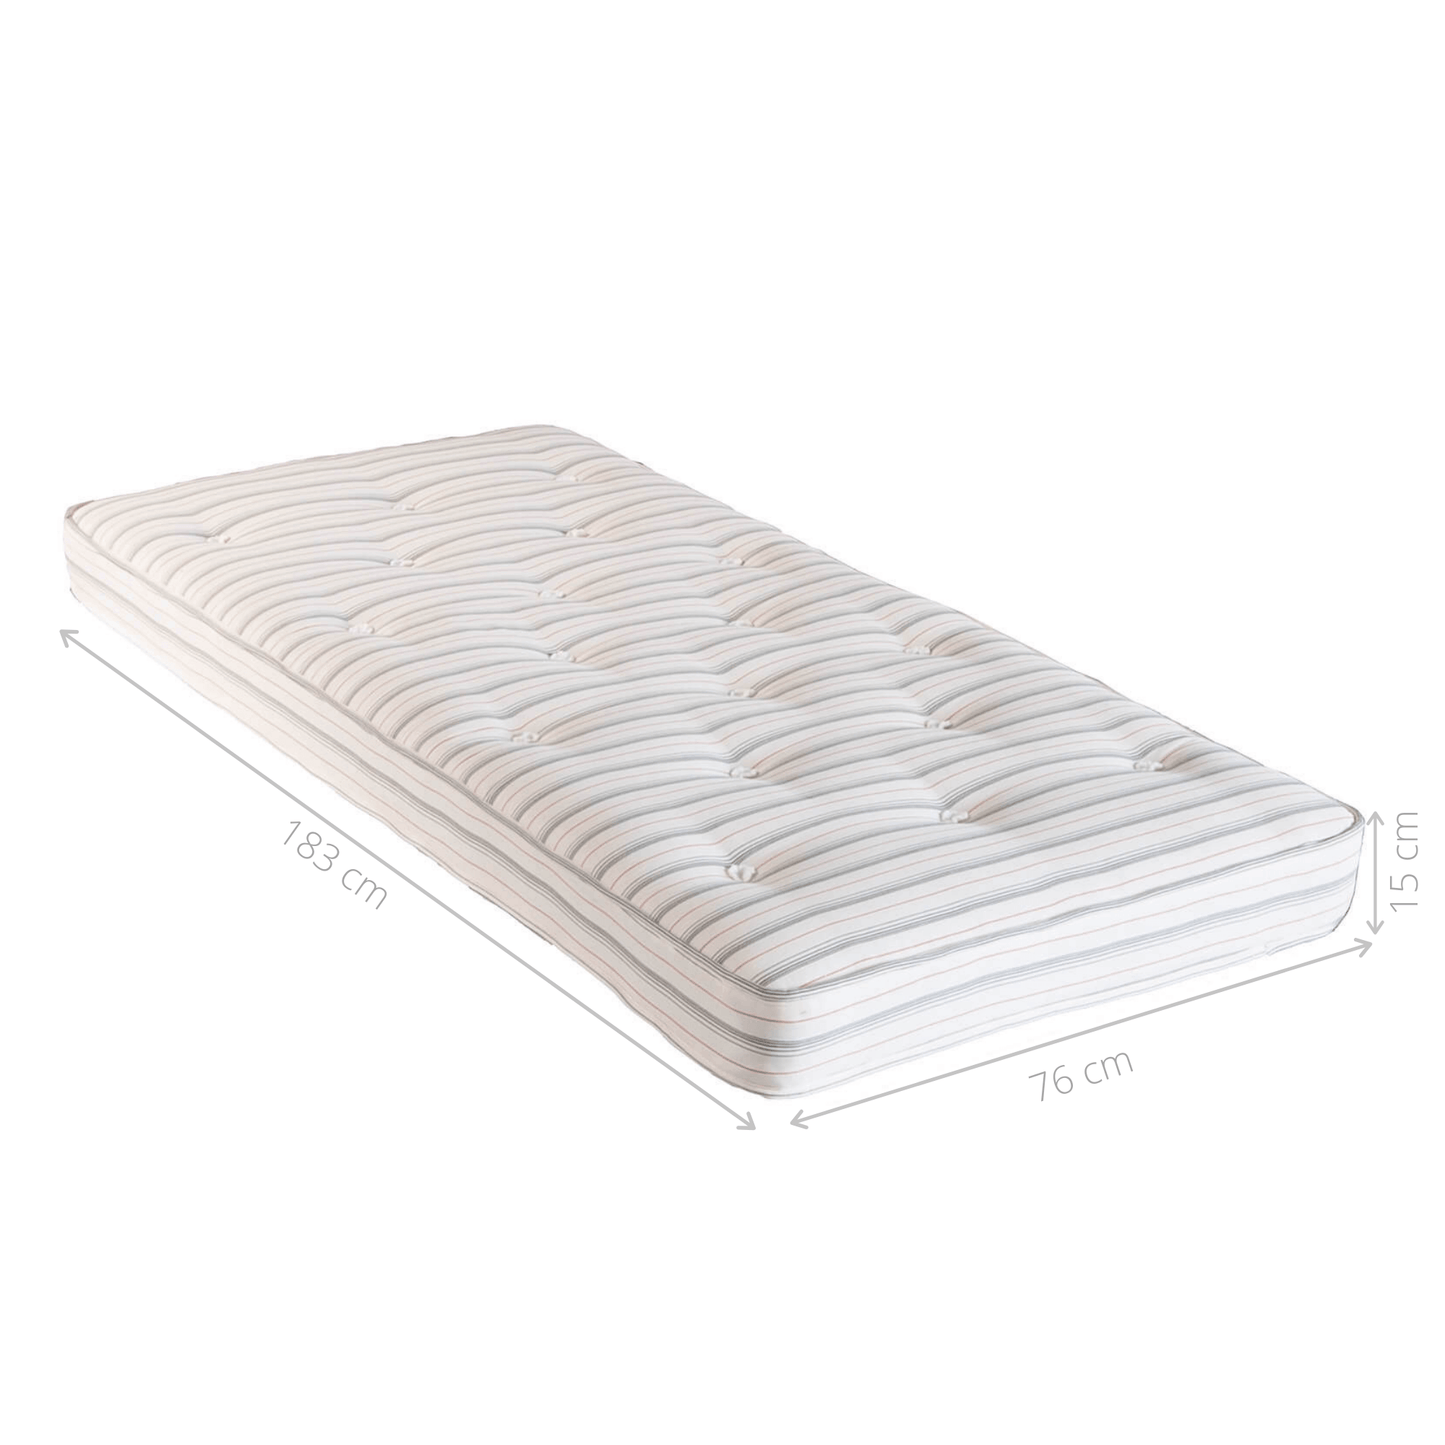 trundle guest bed mattress dimensions